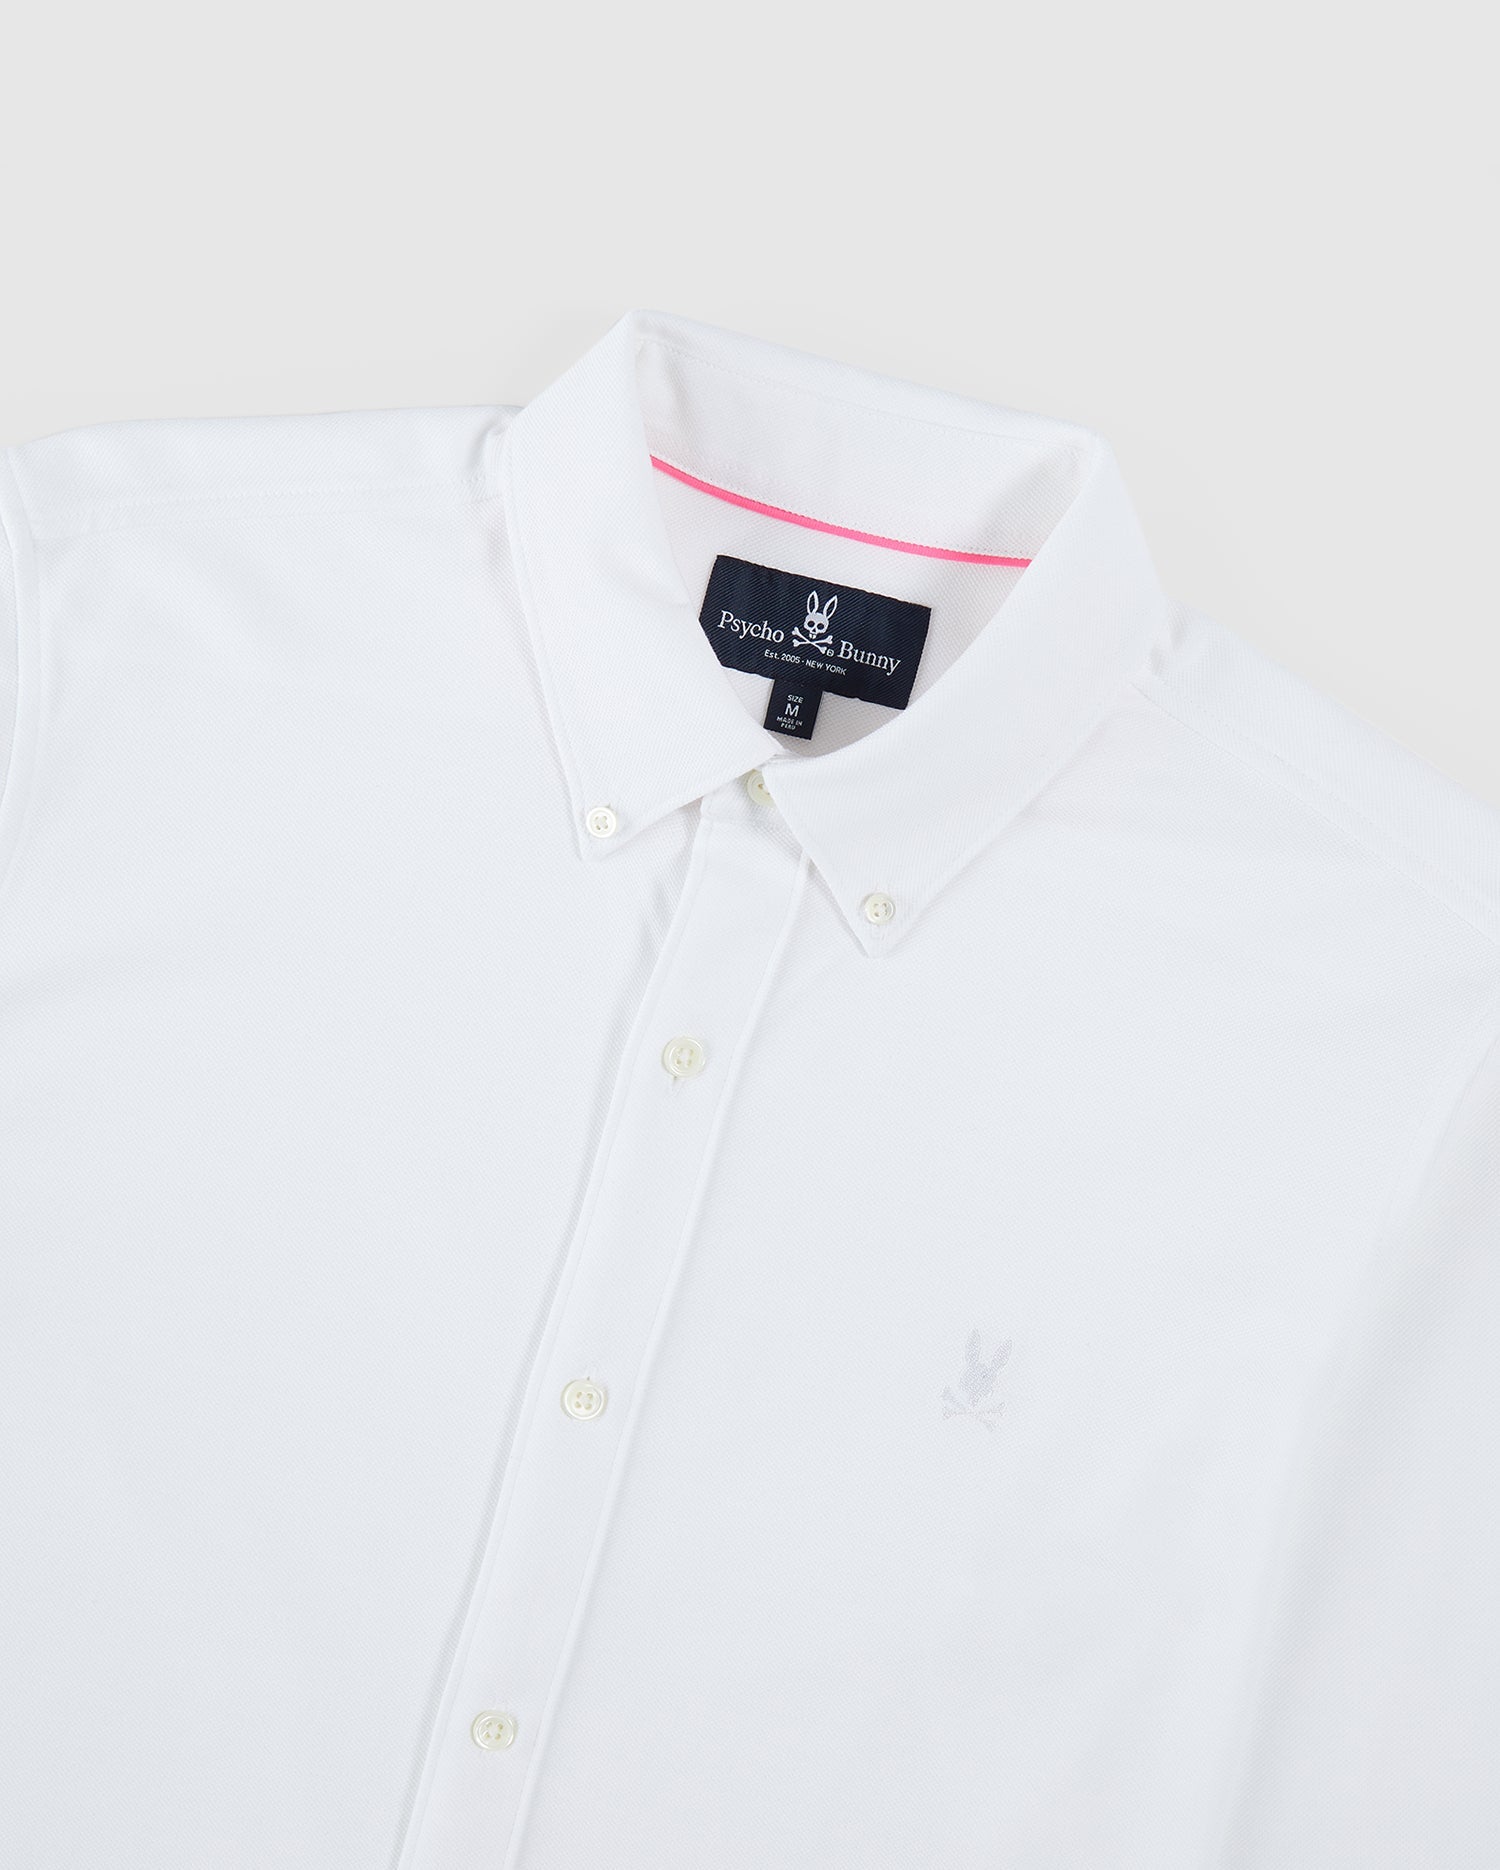 Psycho Bunny Canada  Men's Shirts Collection - Elevate Your Wardrobe